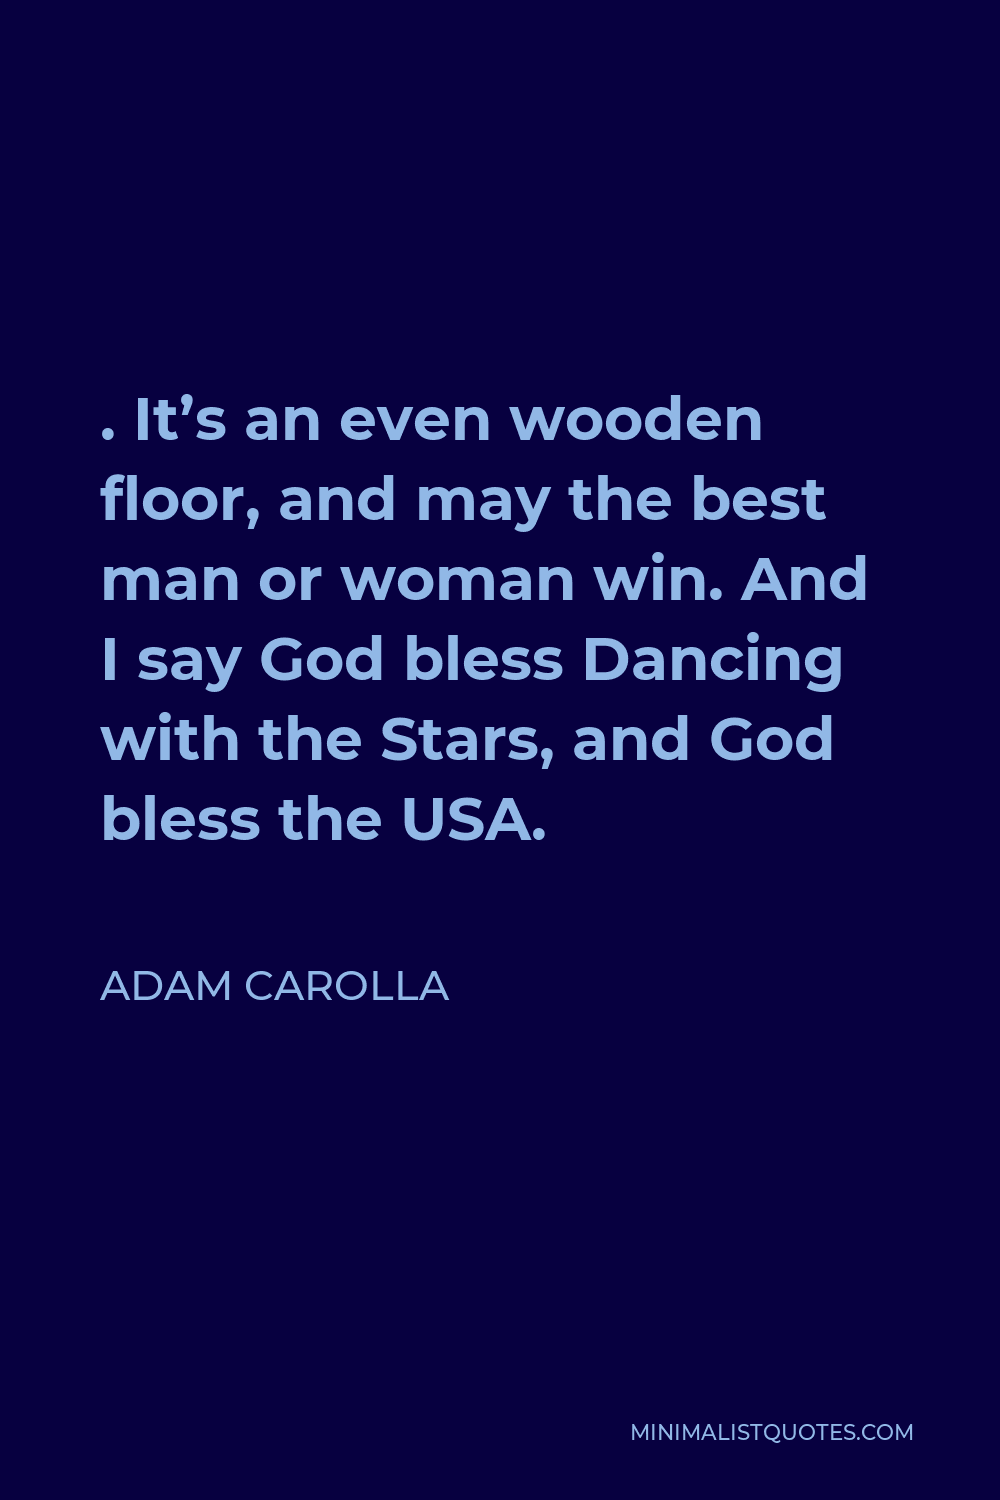 Adam Carolla Quote - . It’s an even wooden floor, and may the best man or woman win. And I say God bless Dancing with the Stars, and God bless the USA.